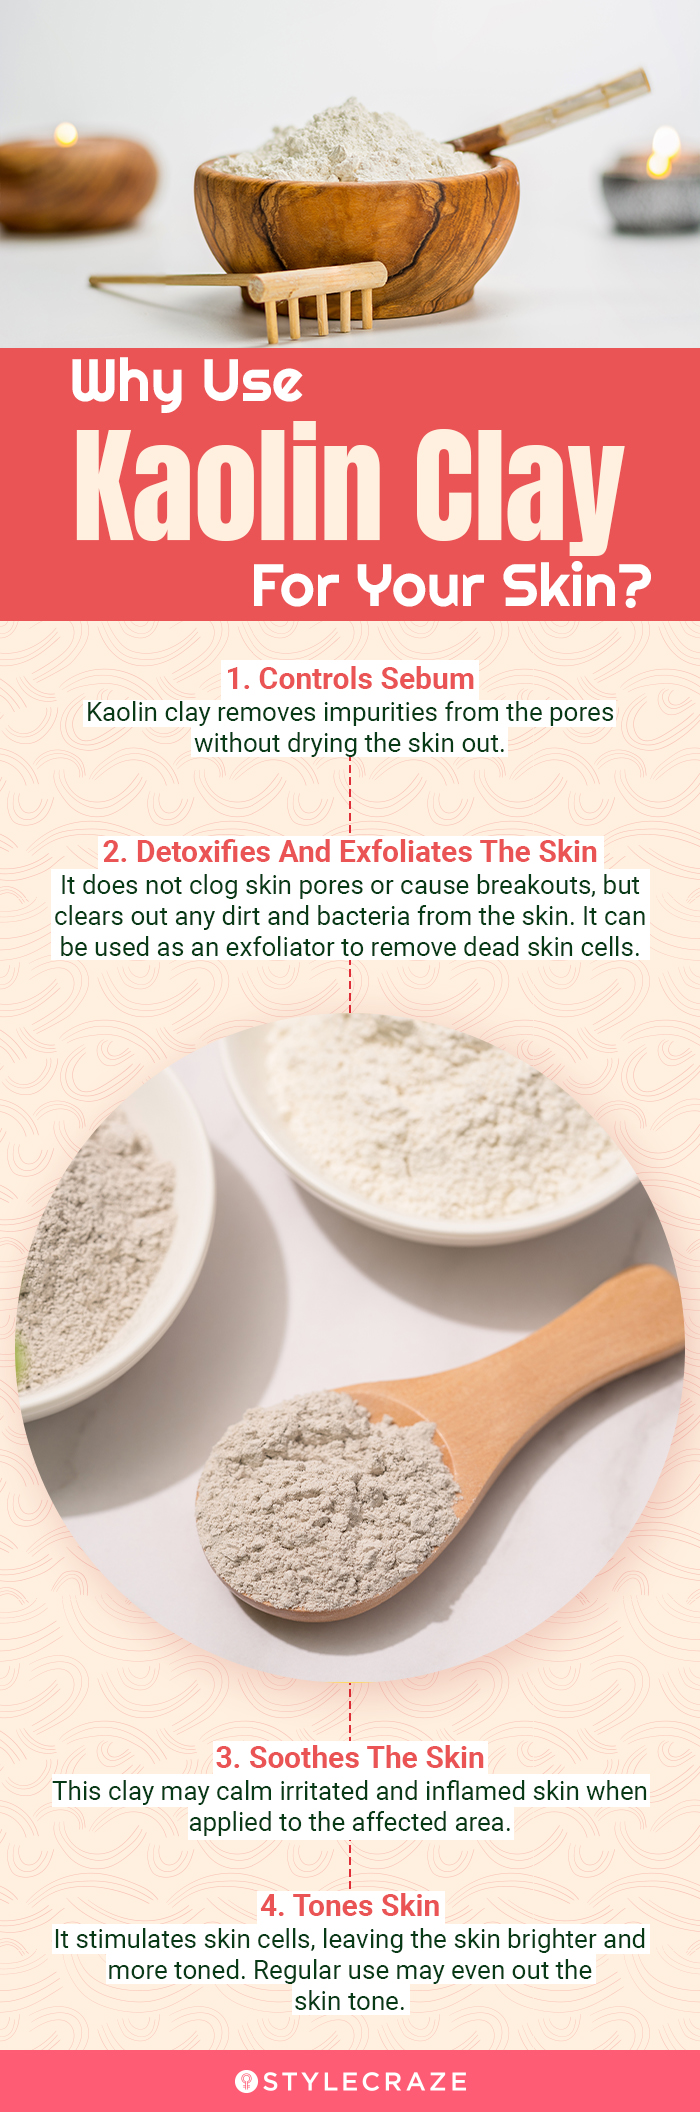 why use kaolin clay for skin (infographic)